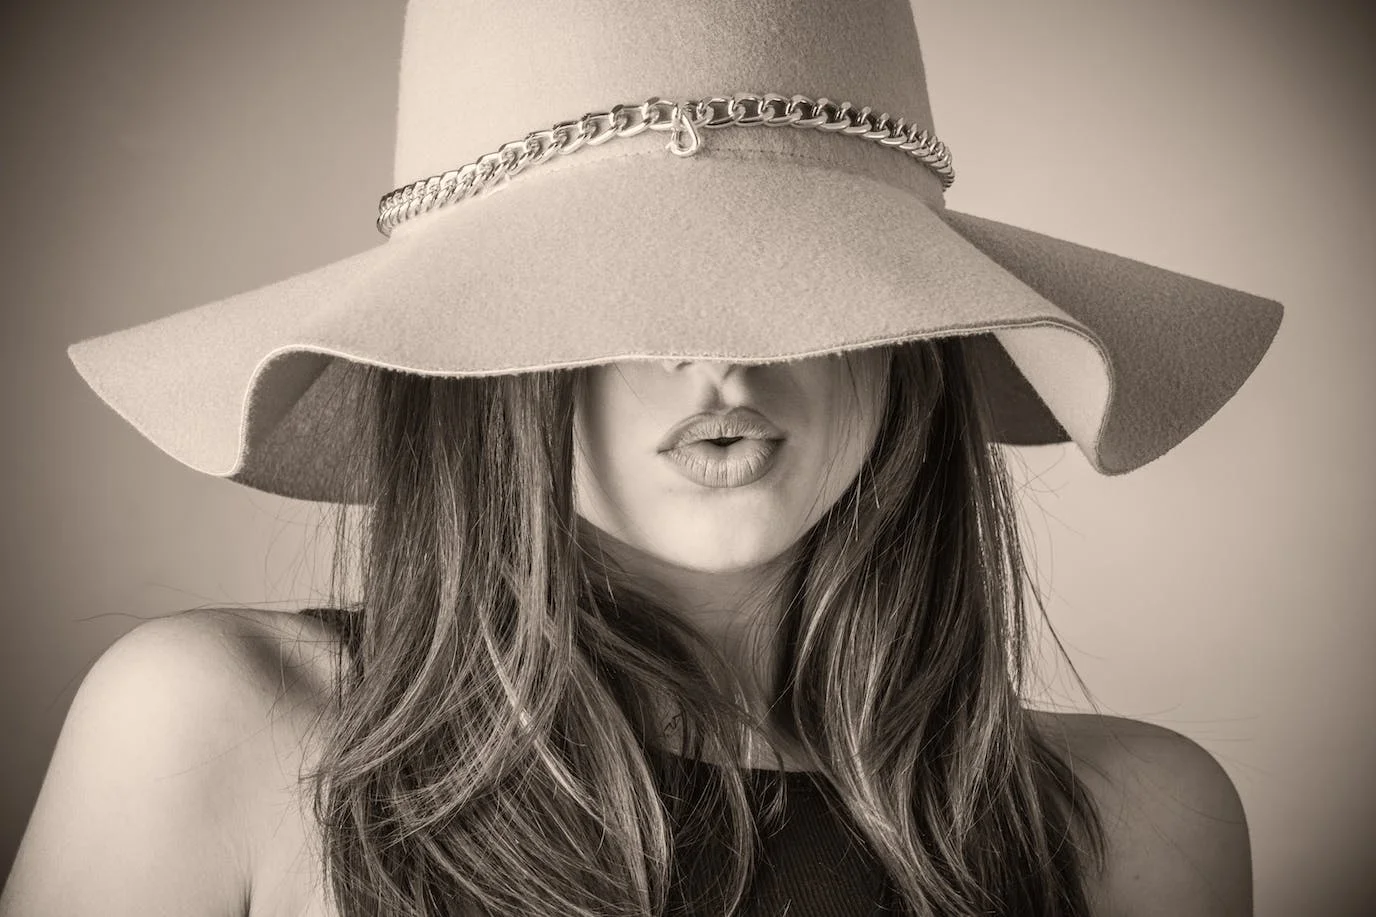 Woman photo : black and white/sepia photography of a long-haired woman wearing a hat.